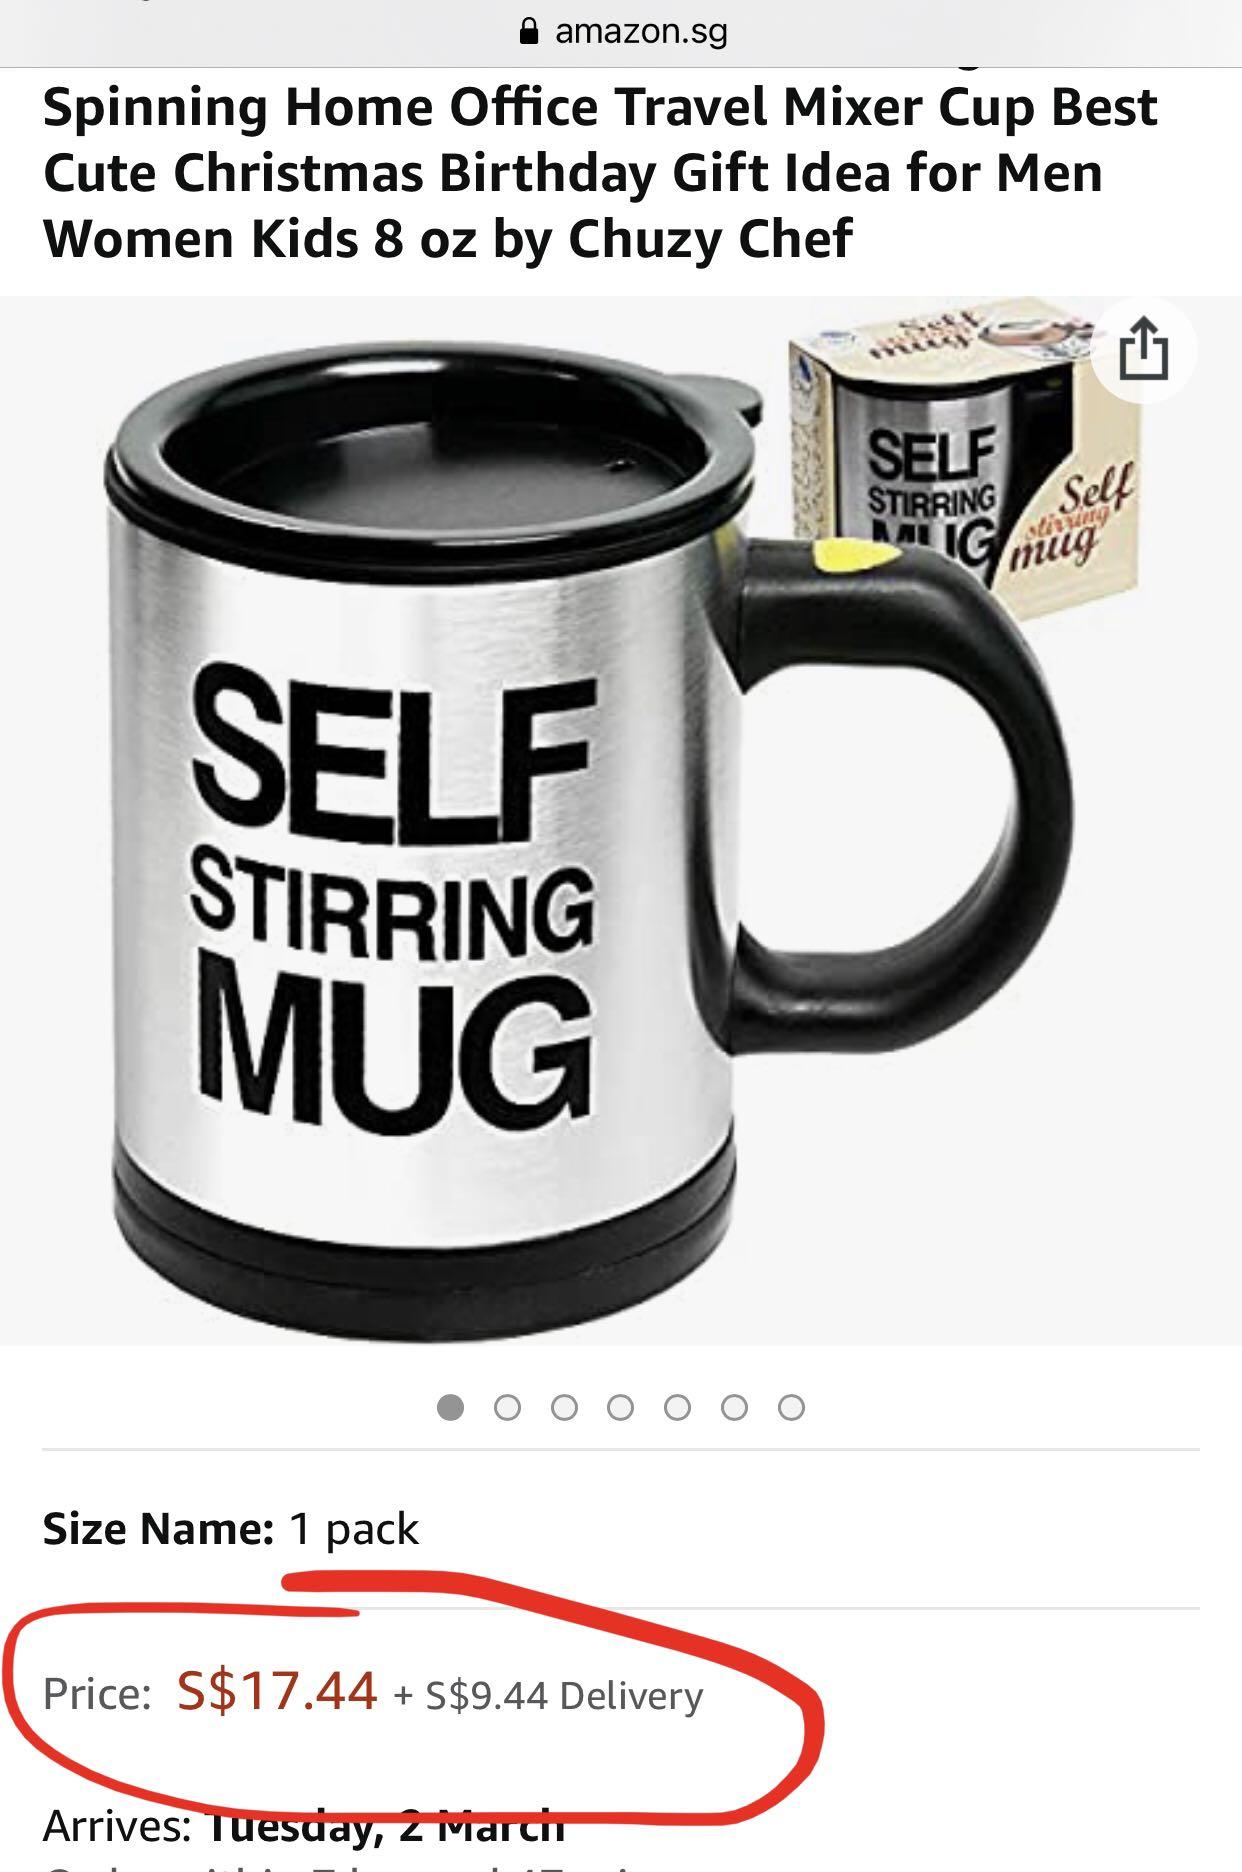  Self Stirring Coffee Mug Cup - Funny Electric Stainless Steel Automatic  Self Mixing & Spinning Home Office Travel Mixer Cup Best Cute Christmas  Birthday Gift Idea for Men Women Kids 8